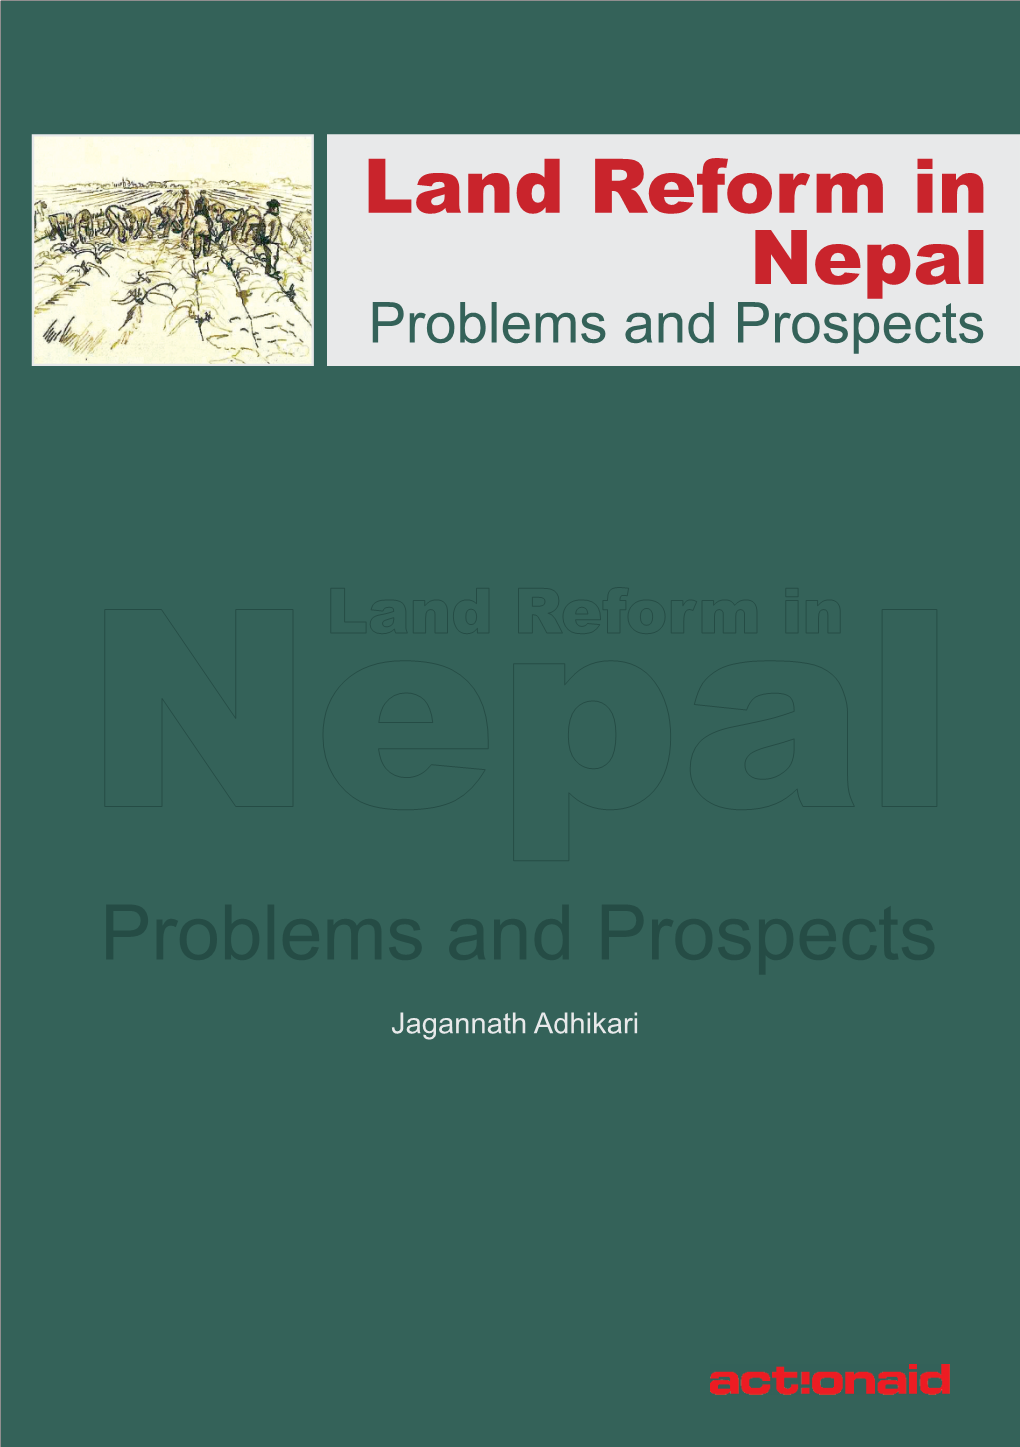 Land Reform in Nepal: Problems and Prospects 1.1 Access to Land and Poverty Reduction